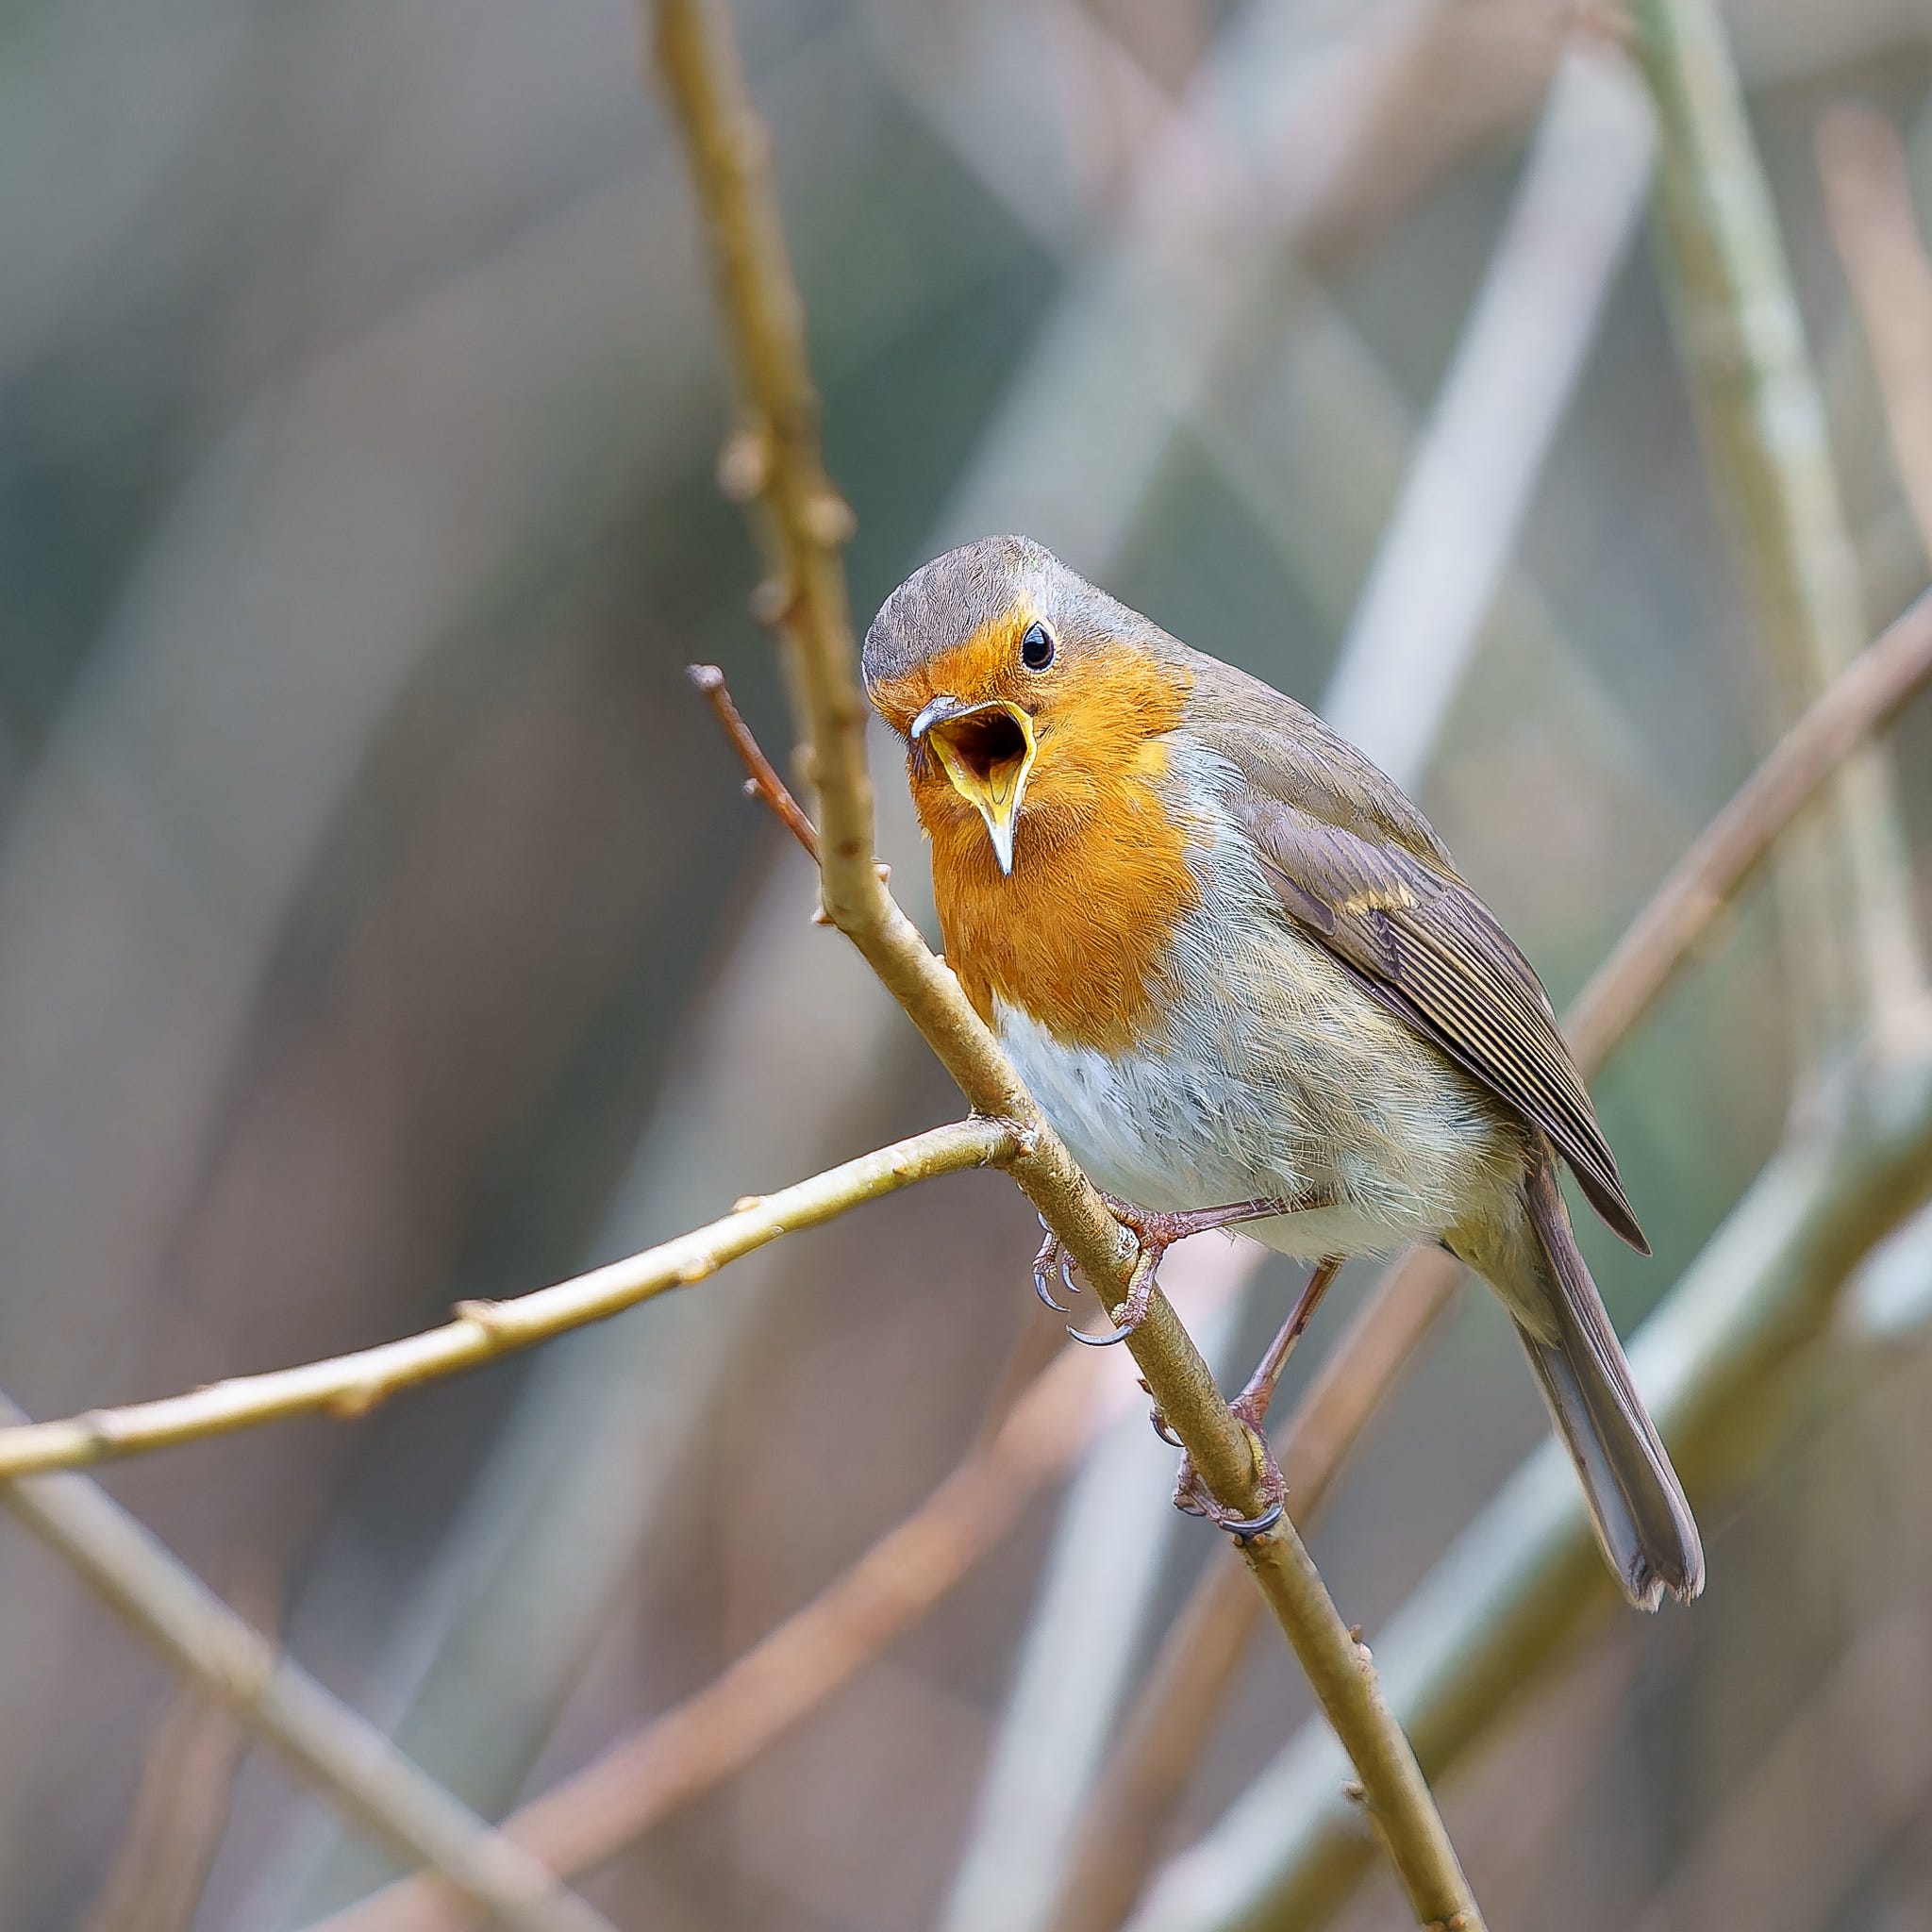 Photo of a robin singing taken by Gerhard Sommer